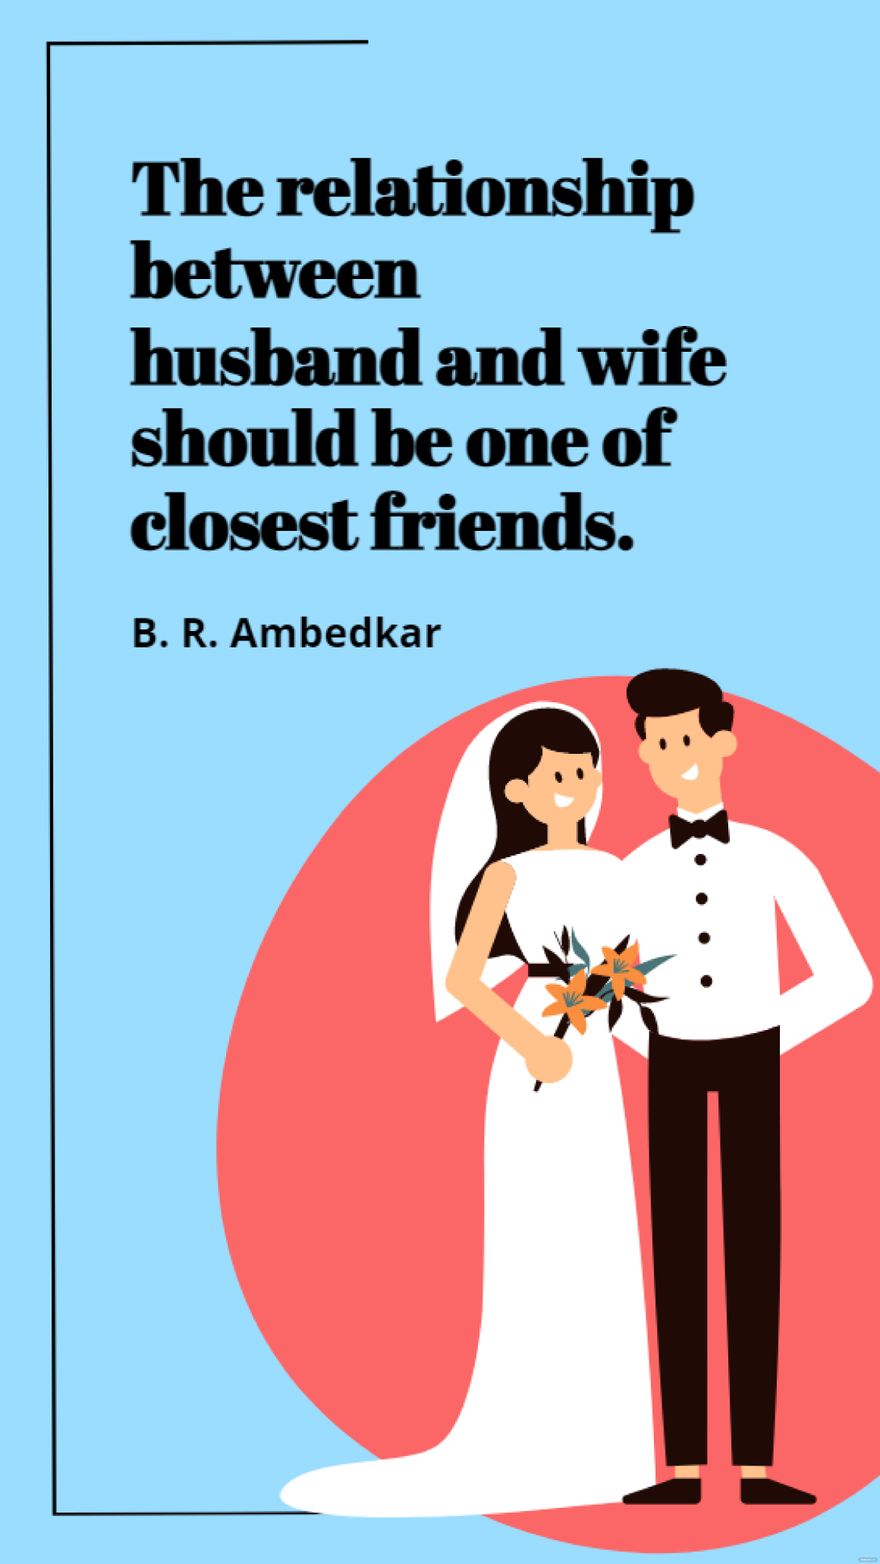 B. R. Ambedkar - The relationship between husband and wife should be one of closest friends.